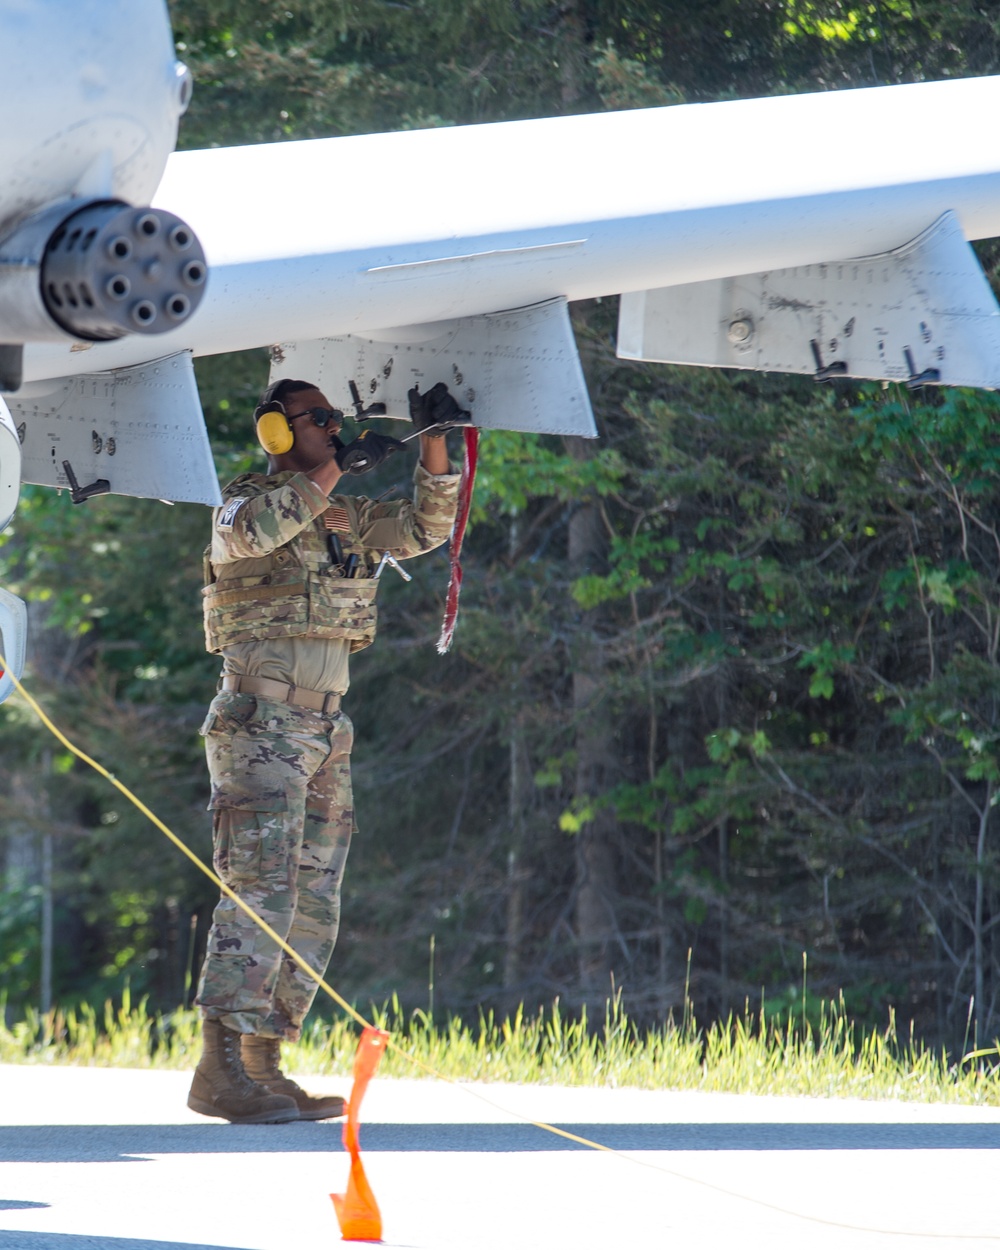 Michigan National Guard exercise lands aircraft on highway